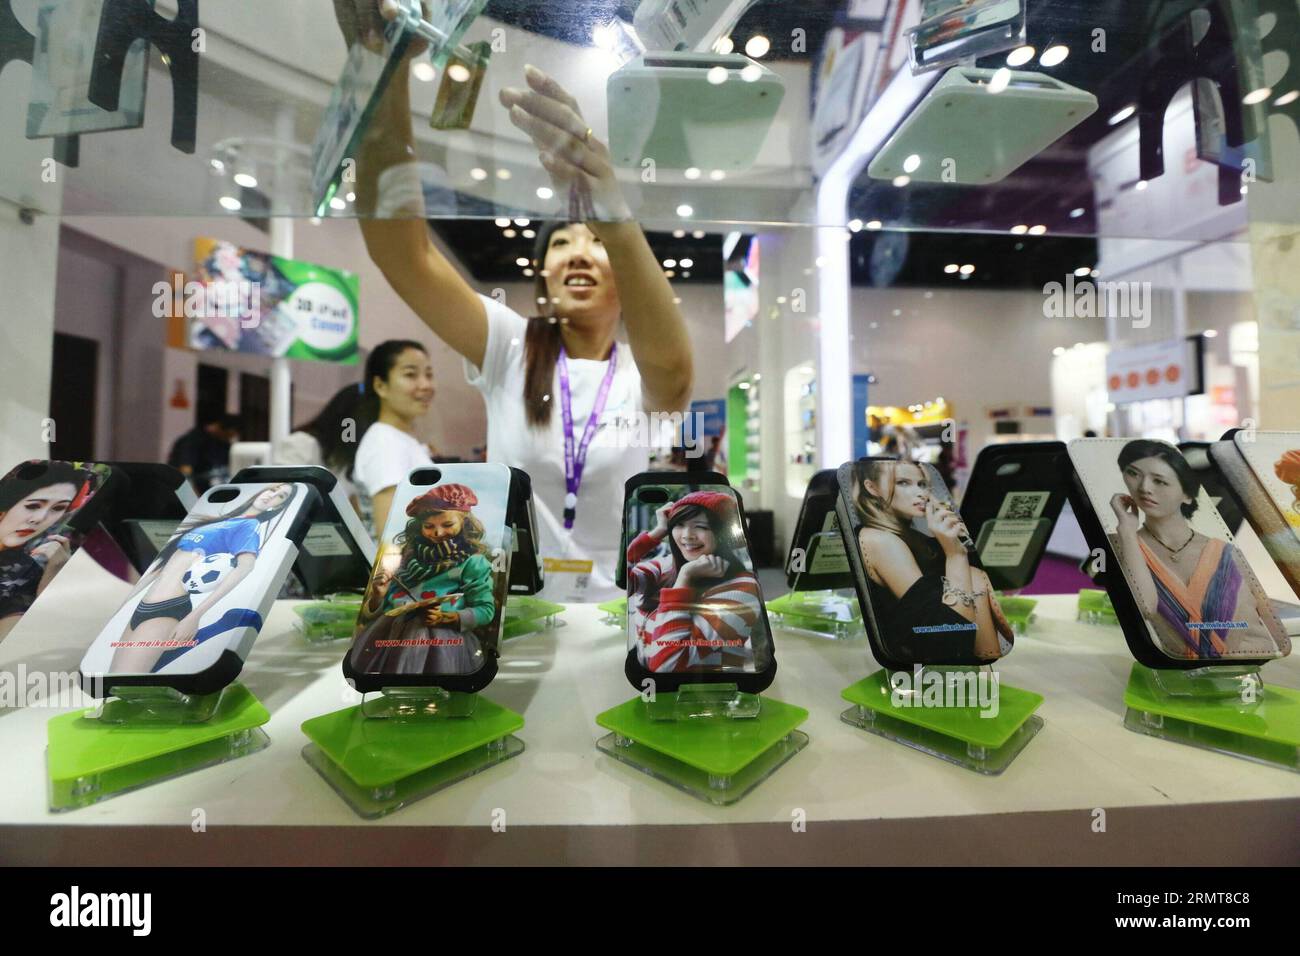 BEIJING, Aug. 21, 2014 () -- A series of iPhone cases are displayed during the Macworld/iWorld Asia 2014, an Apple peripherals and accessories event, in Beijing, capital of China, Aug. 21, 2014. The four-day event kicked off Thursday at Beijing s China National Convention Center, attracting over 300 world exhibitors. () (lmm) CHINA-BEIJING-TECHNOLOGY-MACWORLD/IWORLD ASIA-EXHIBITION (CN) Xinhua PUBLICATIONxNOTxINxCHN   Beijing Aug 21 2014 a Series of iPhone Cases are displayed during The MacWorld iWorld Asia 2014 to Apple  and Accessories Event in Beijing Capital of China Aug 21 2014 The Four D Stock Photo